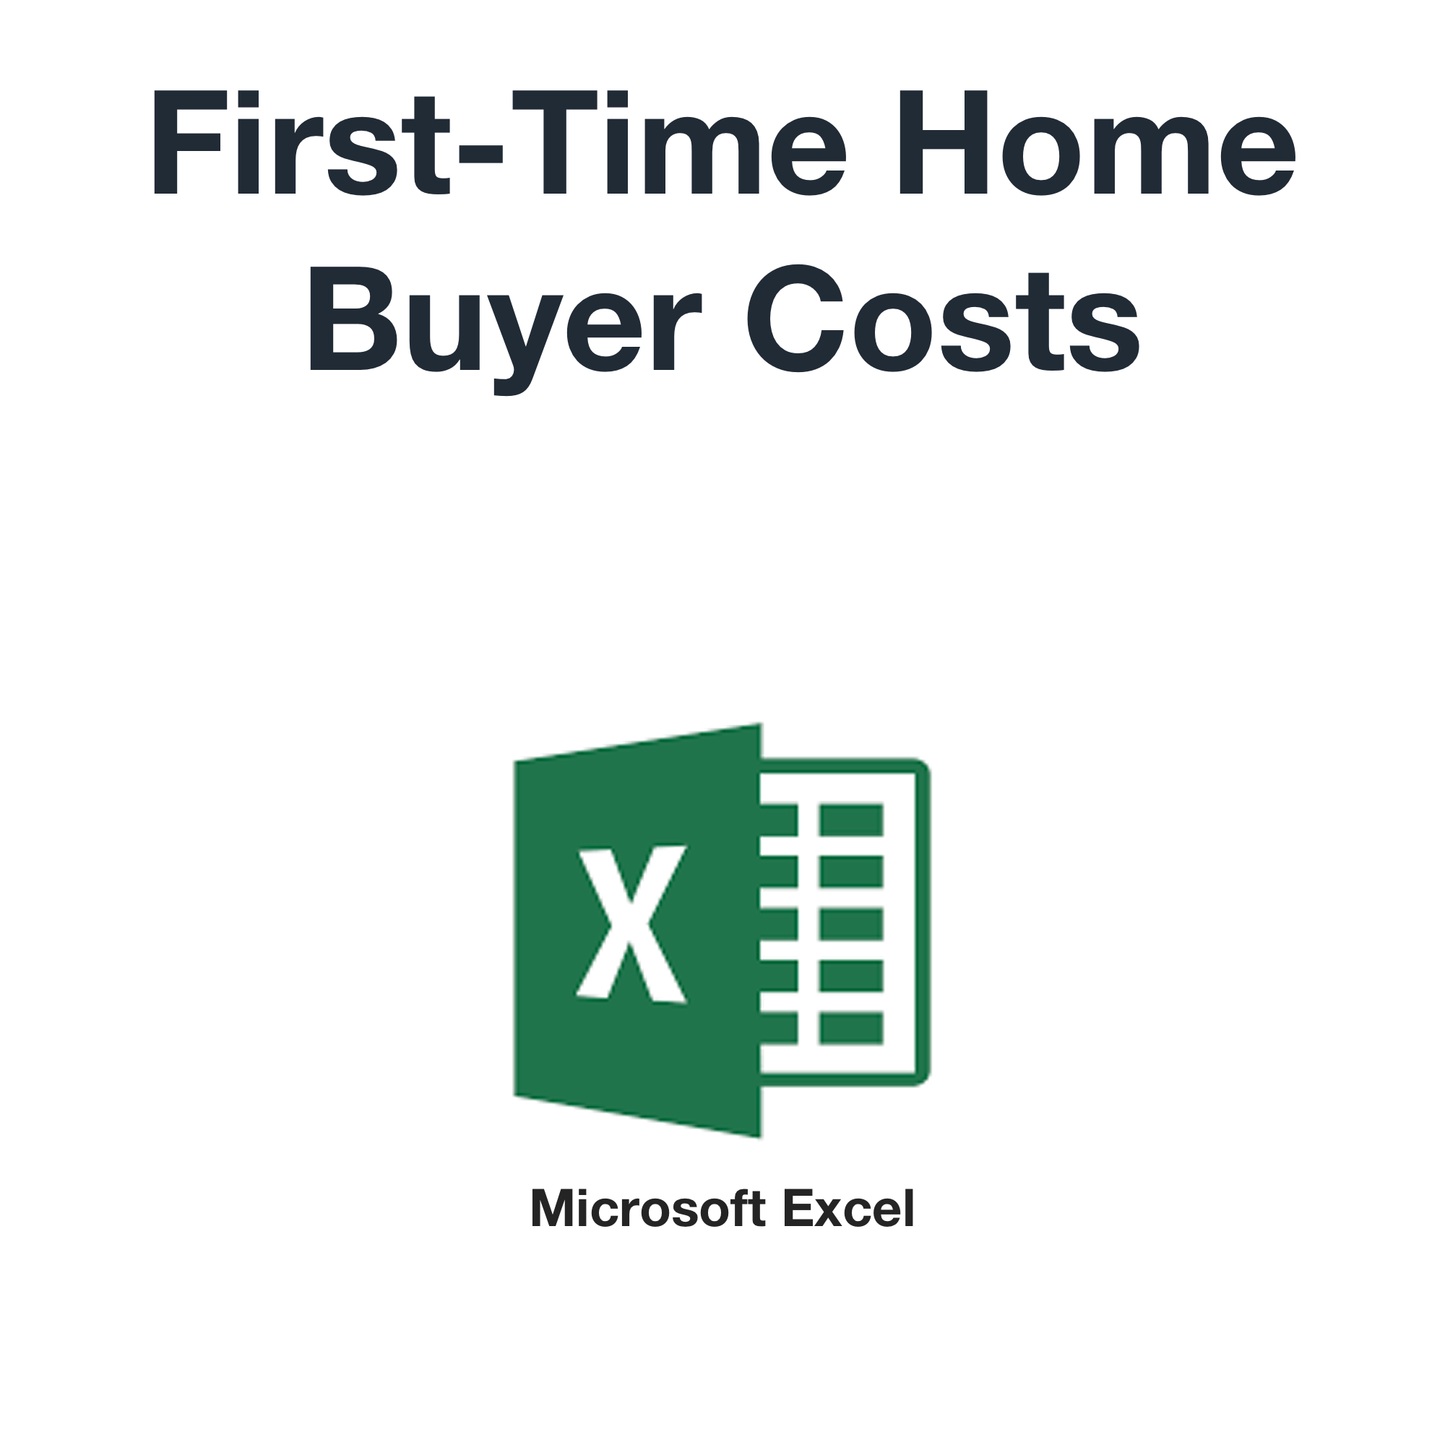 First-time home buyer costs (Microsoft Excel format)